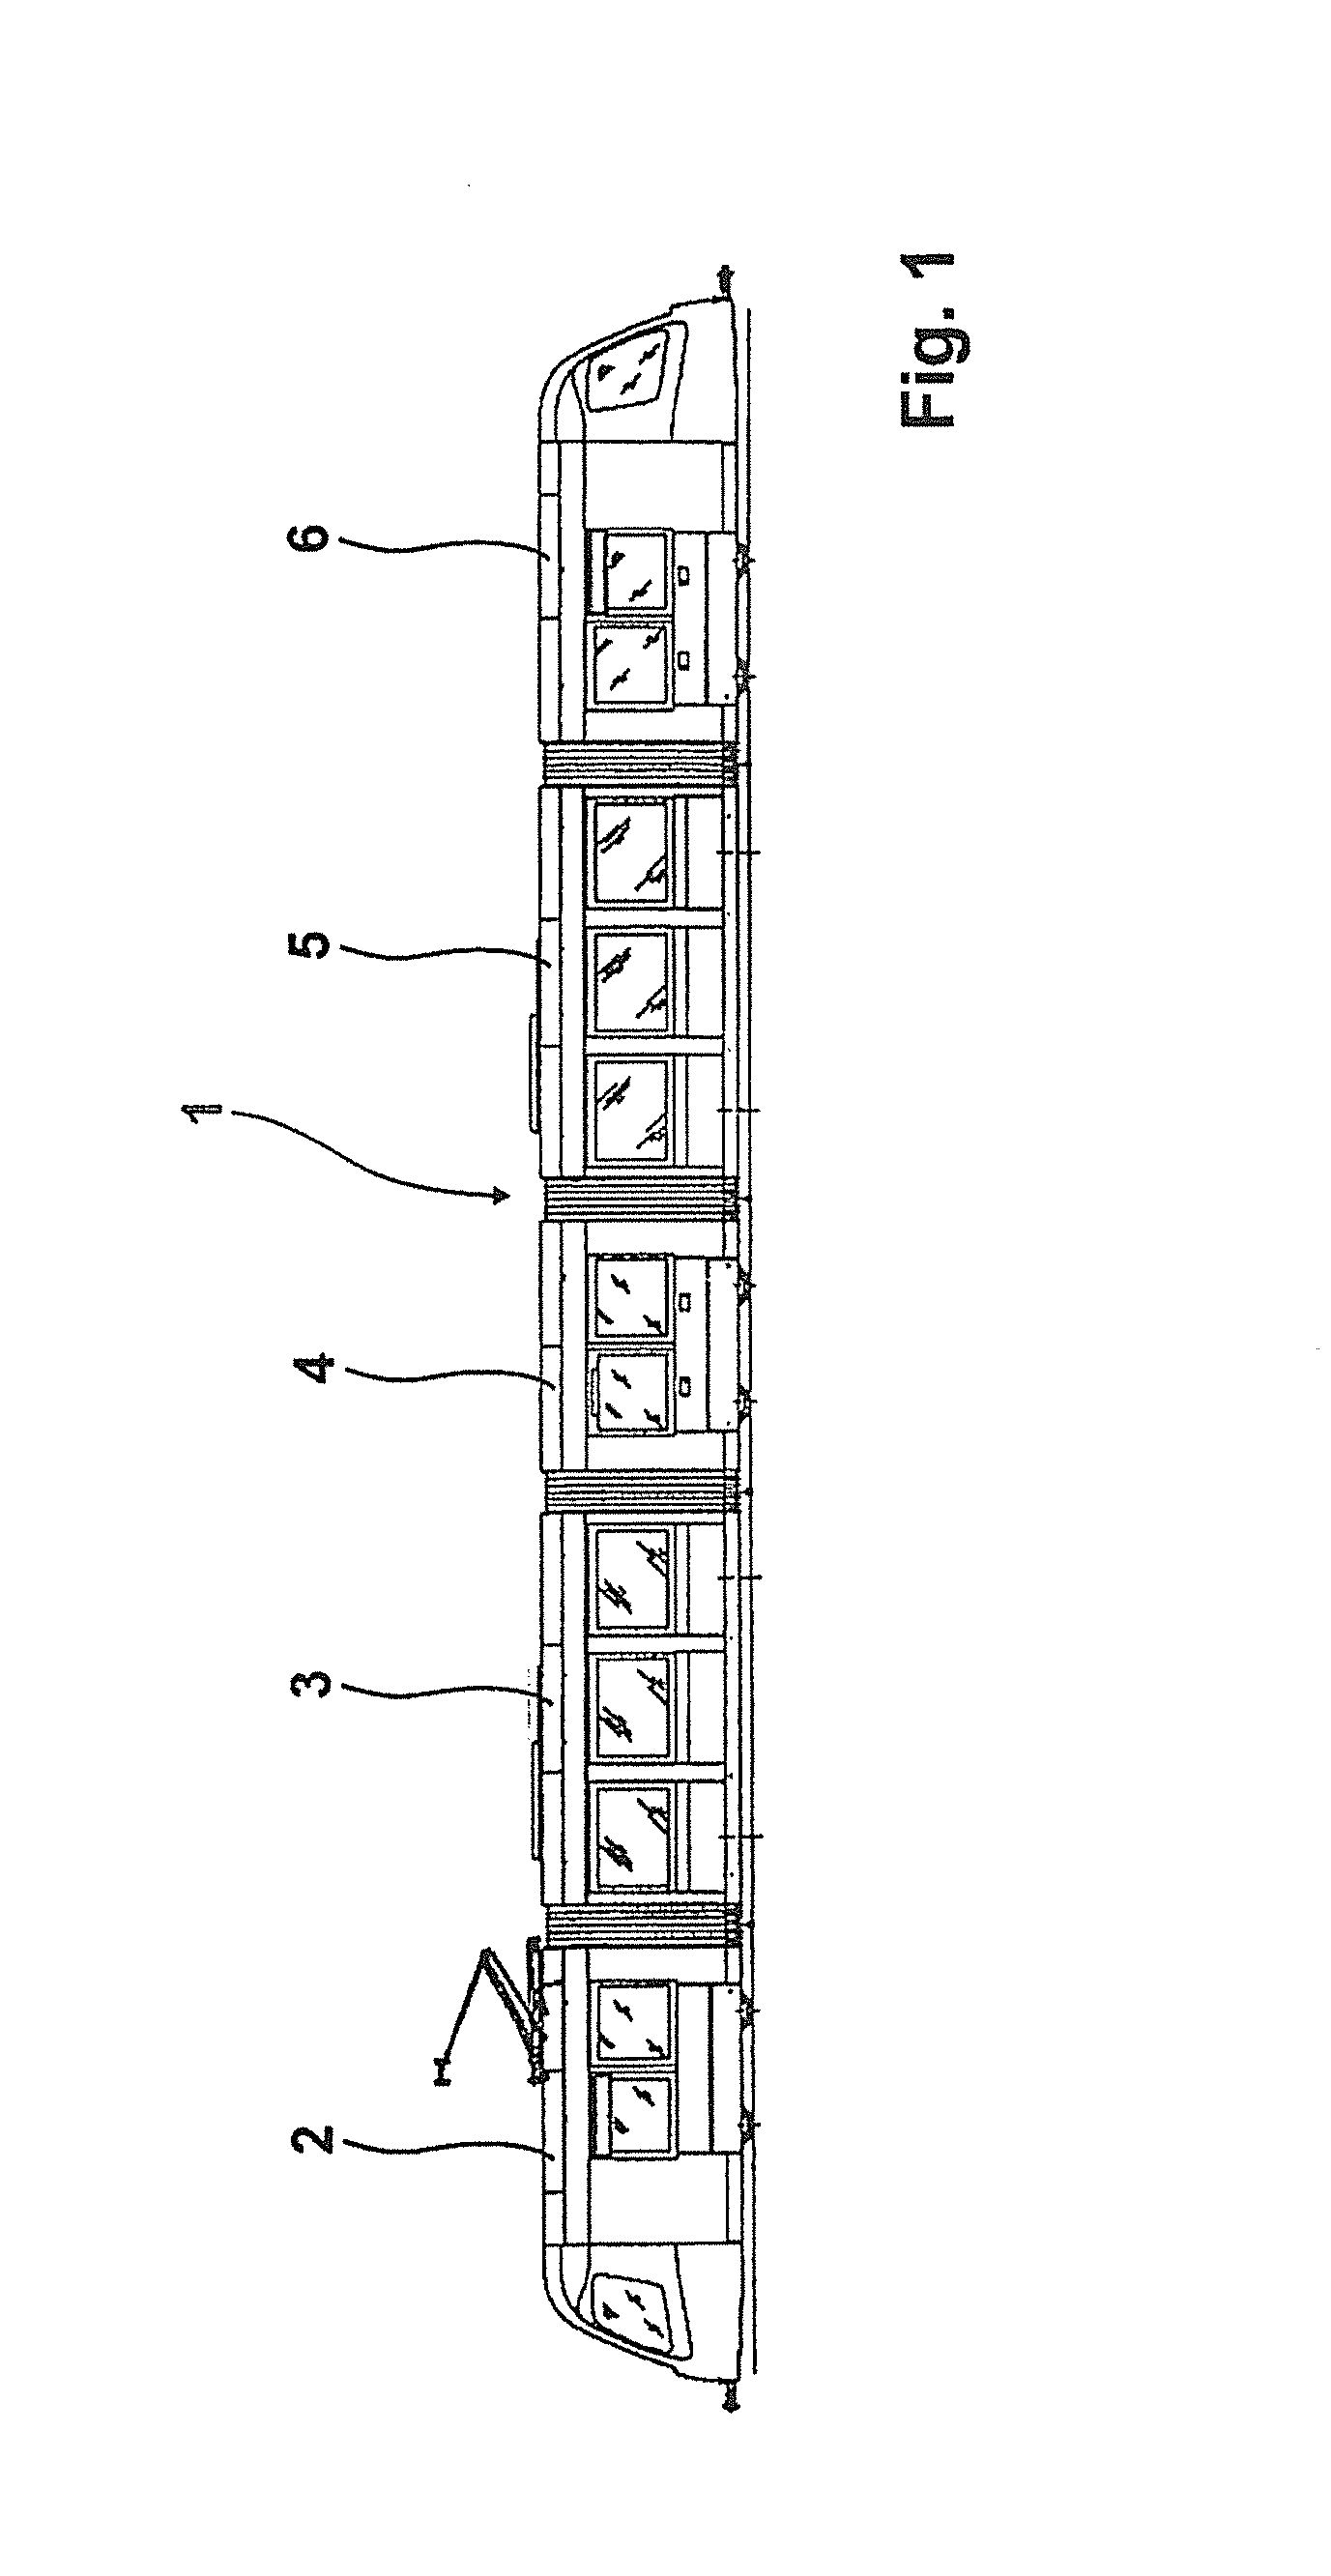 Device disposed in the roof area of two articulated vehicle parts for limiting the pitch movement of the vehicle parts relative to each other